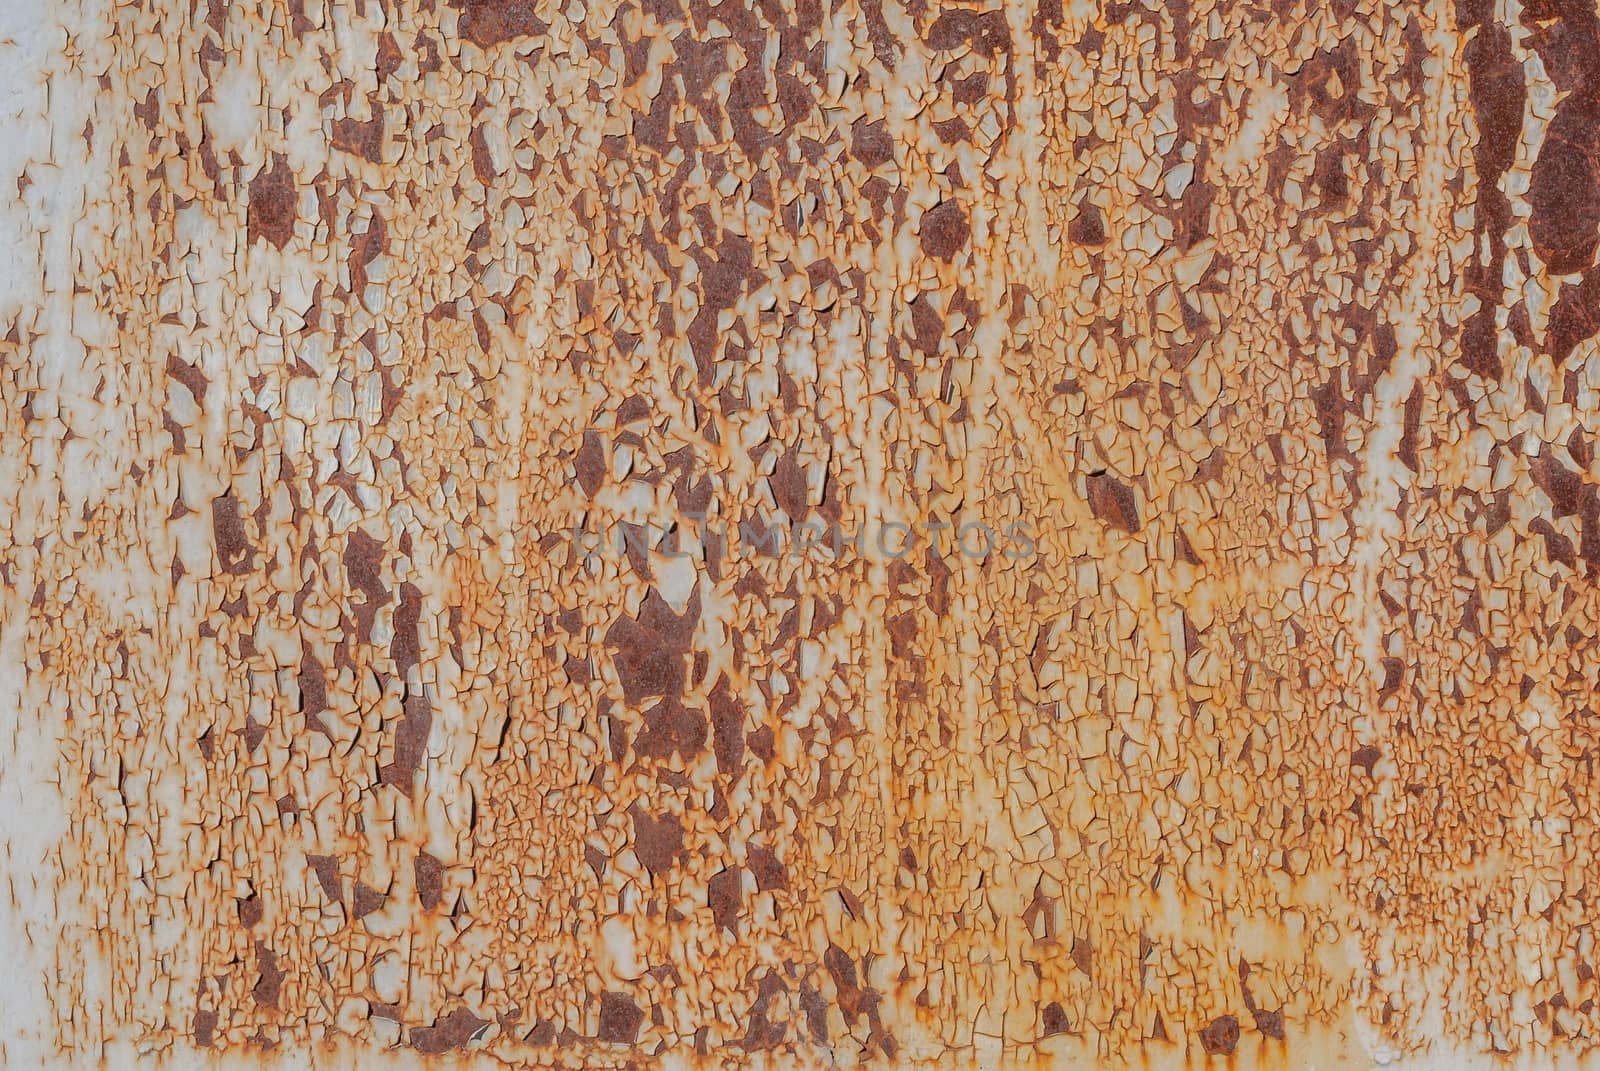 surface of rusty iron with remnants of old paint, chipped paint, texture background by uvisni